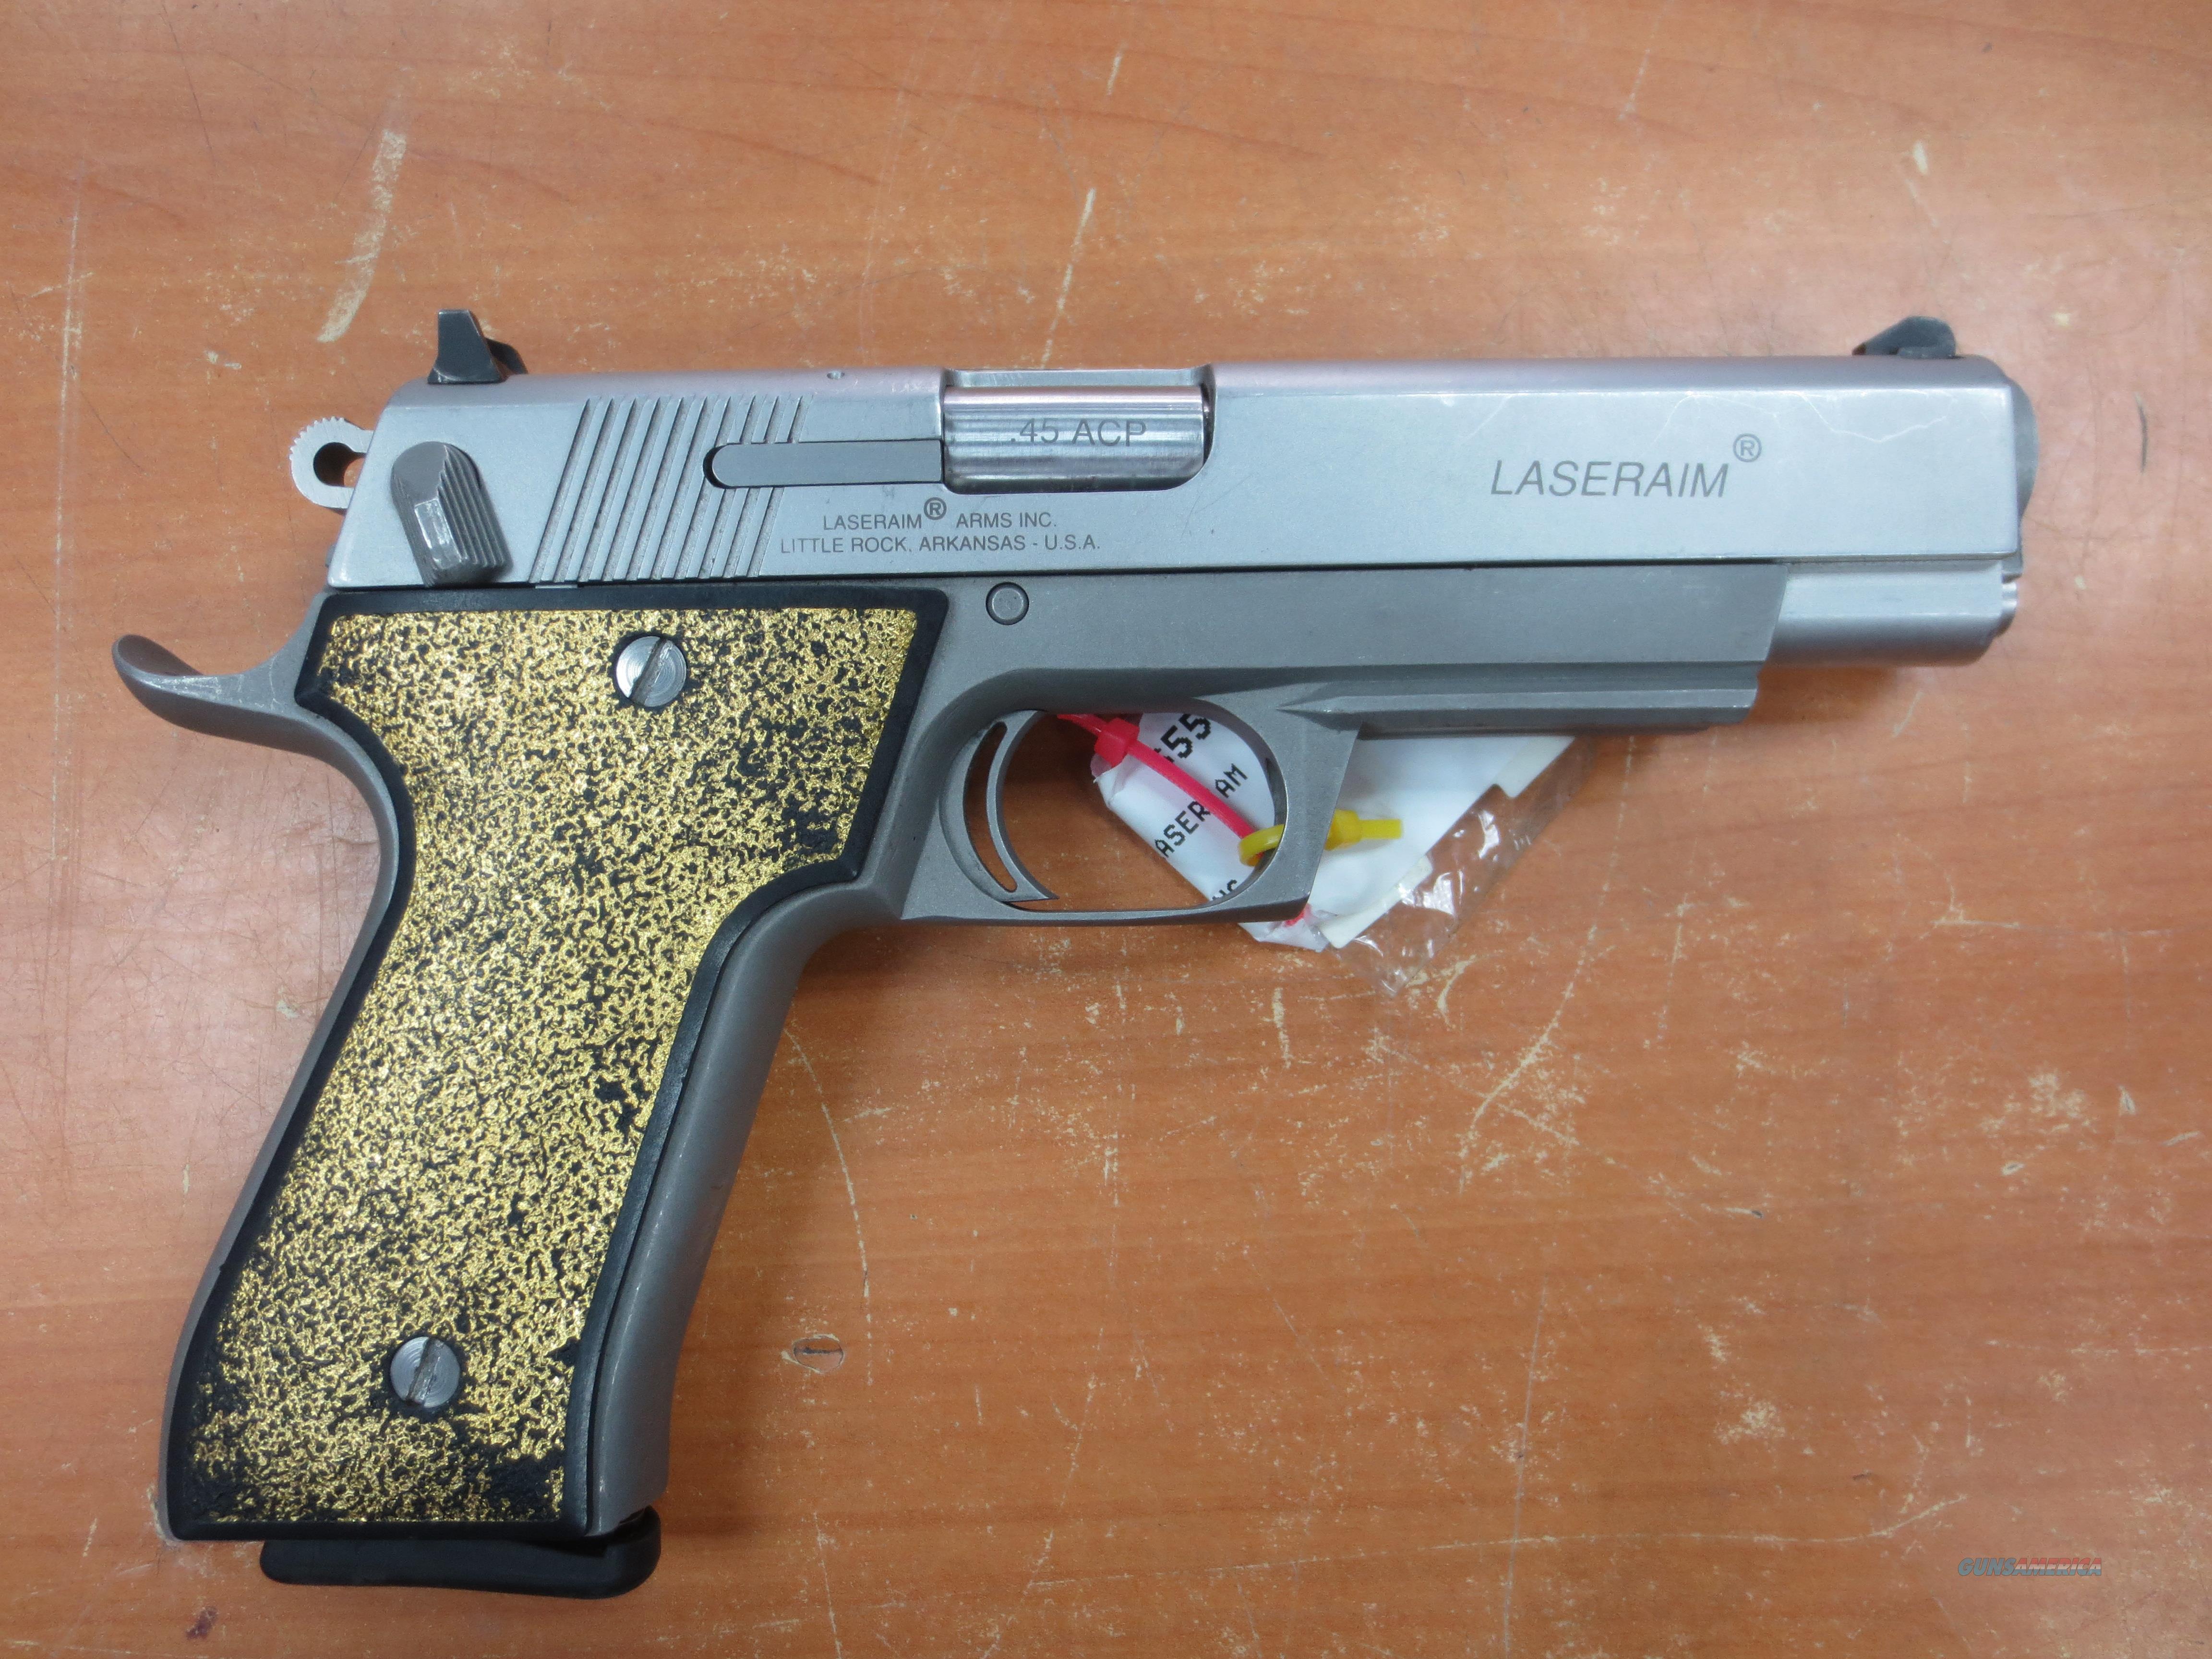 Laseraim 5 Stainless 45 Cal Pistol For Sale At 943281743 3695